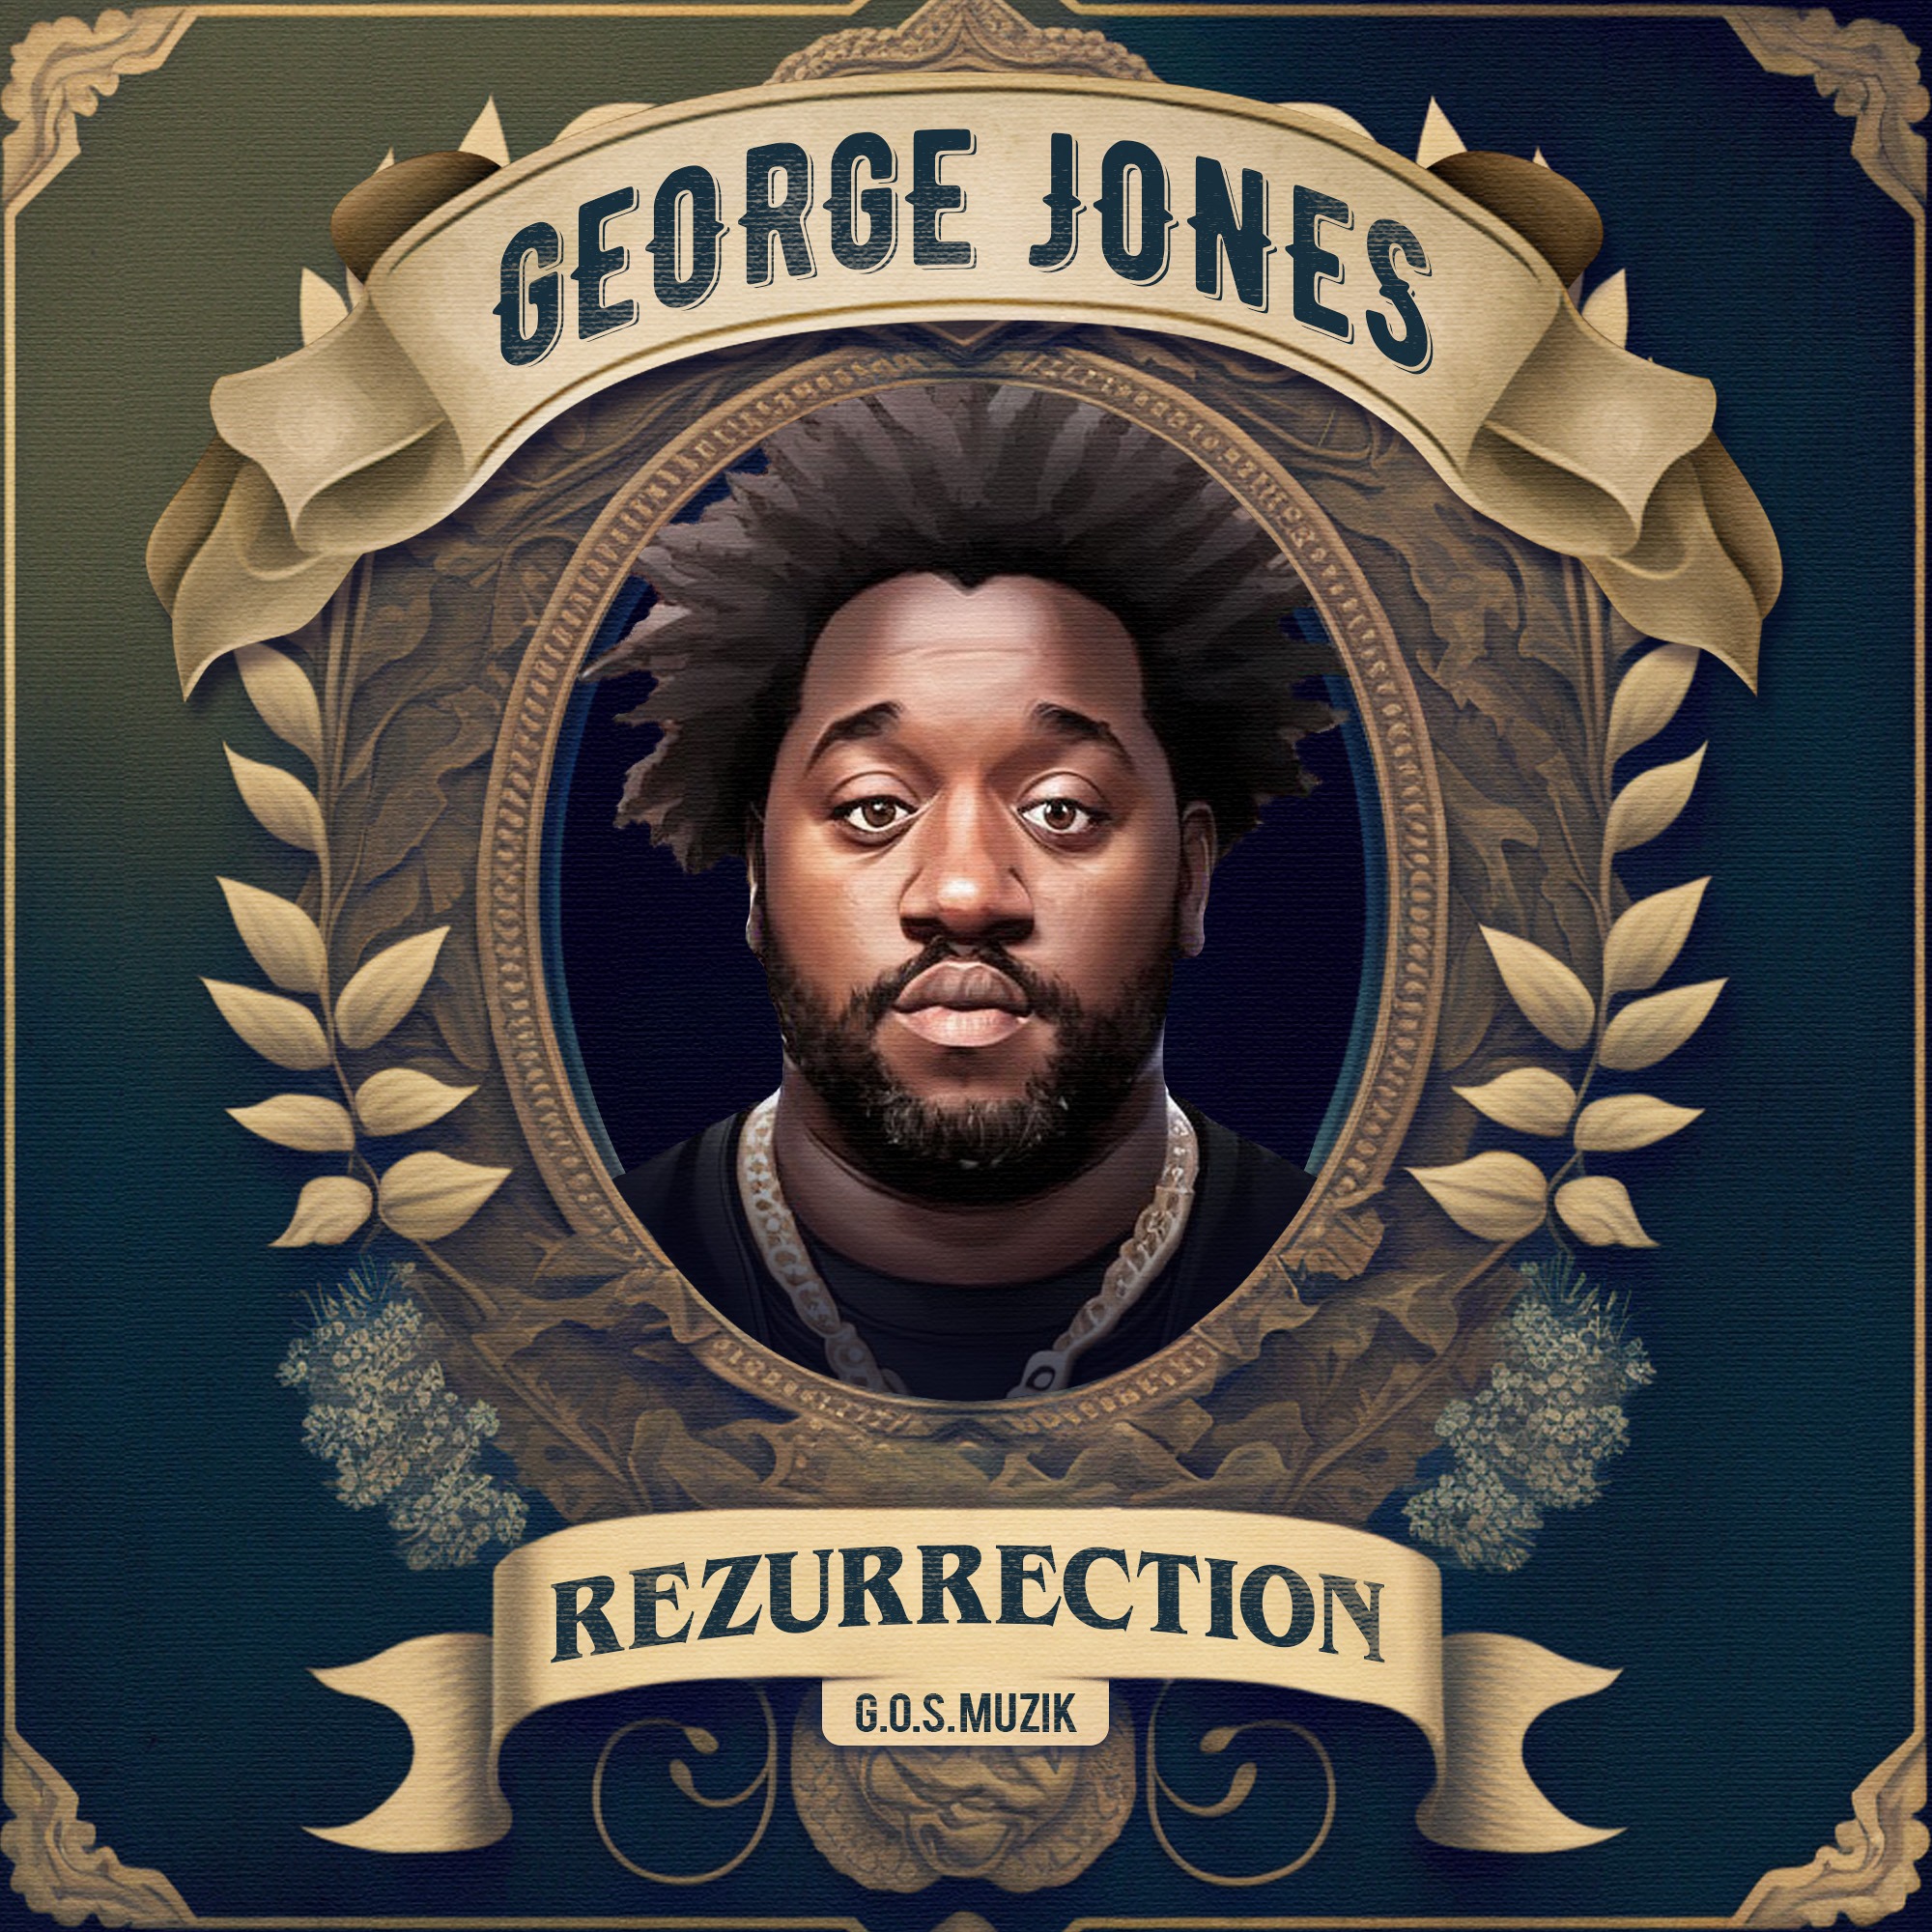 A Spellbinding And Powerful Final Project By An Incomparable Hip Hop-Gospel Artist - Presenting ‘George Jones’